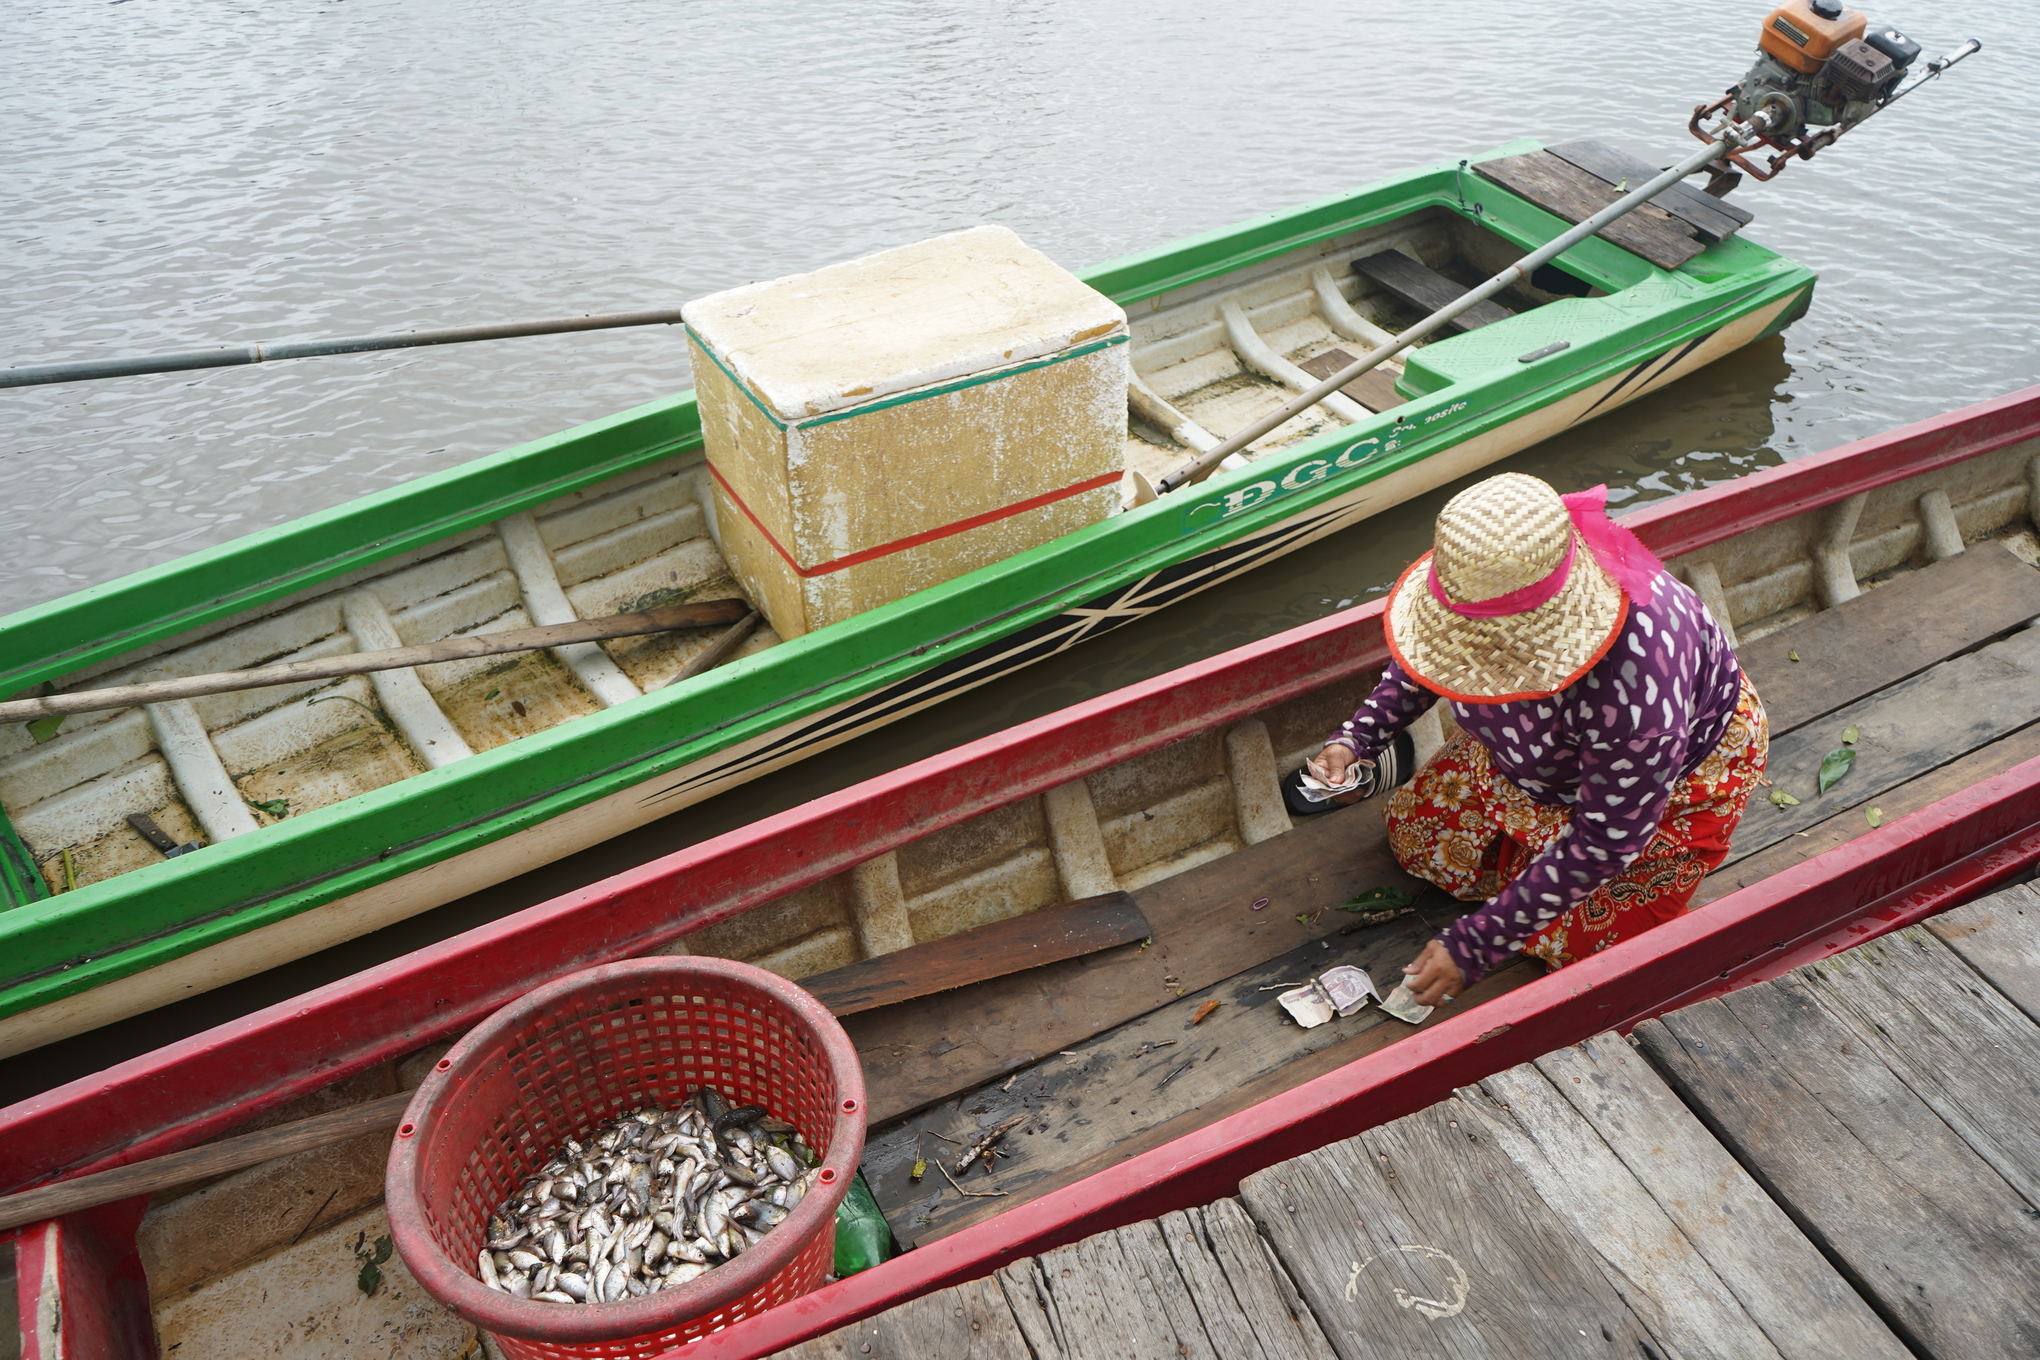 a woman selling fish from a wooden boat